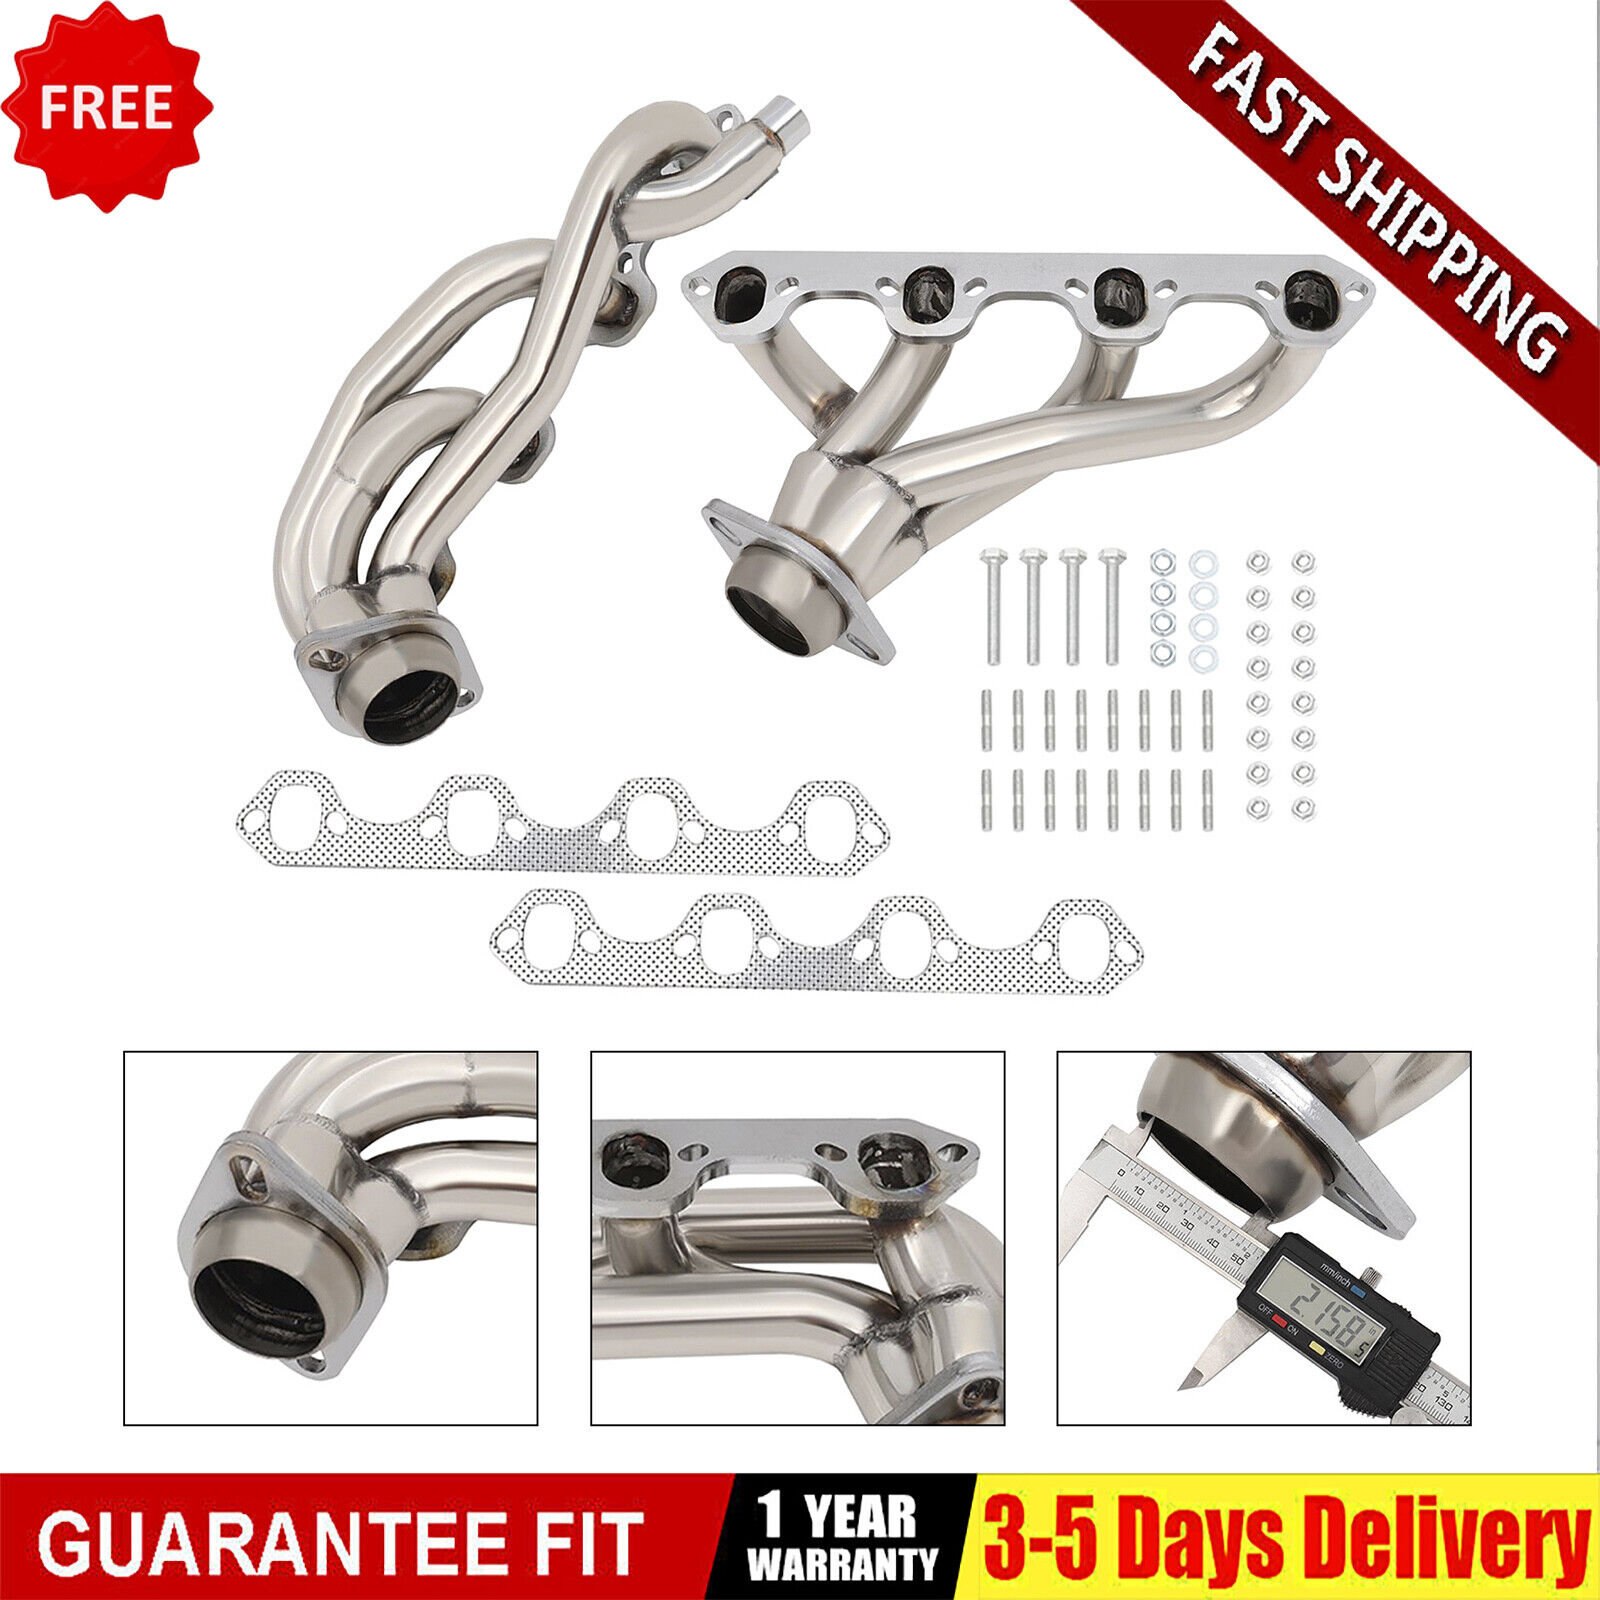 1 Set Exhaust Stainless Header Kit For Ford F150 F250 Bronco 5.8L 87-96 USA NEW